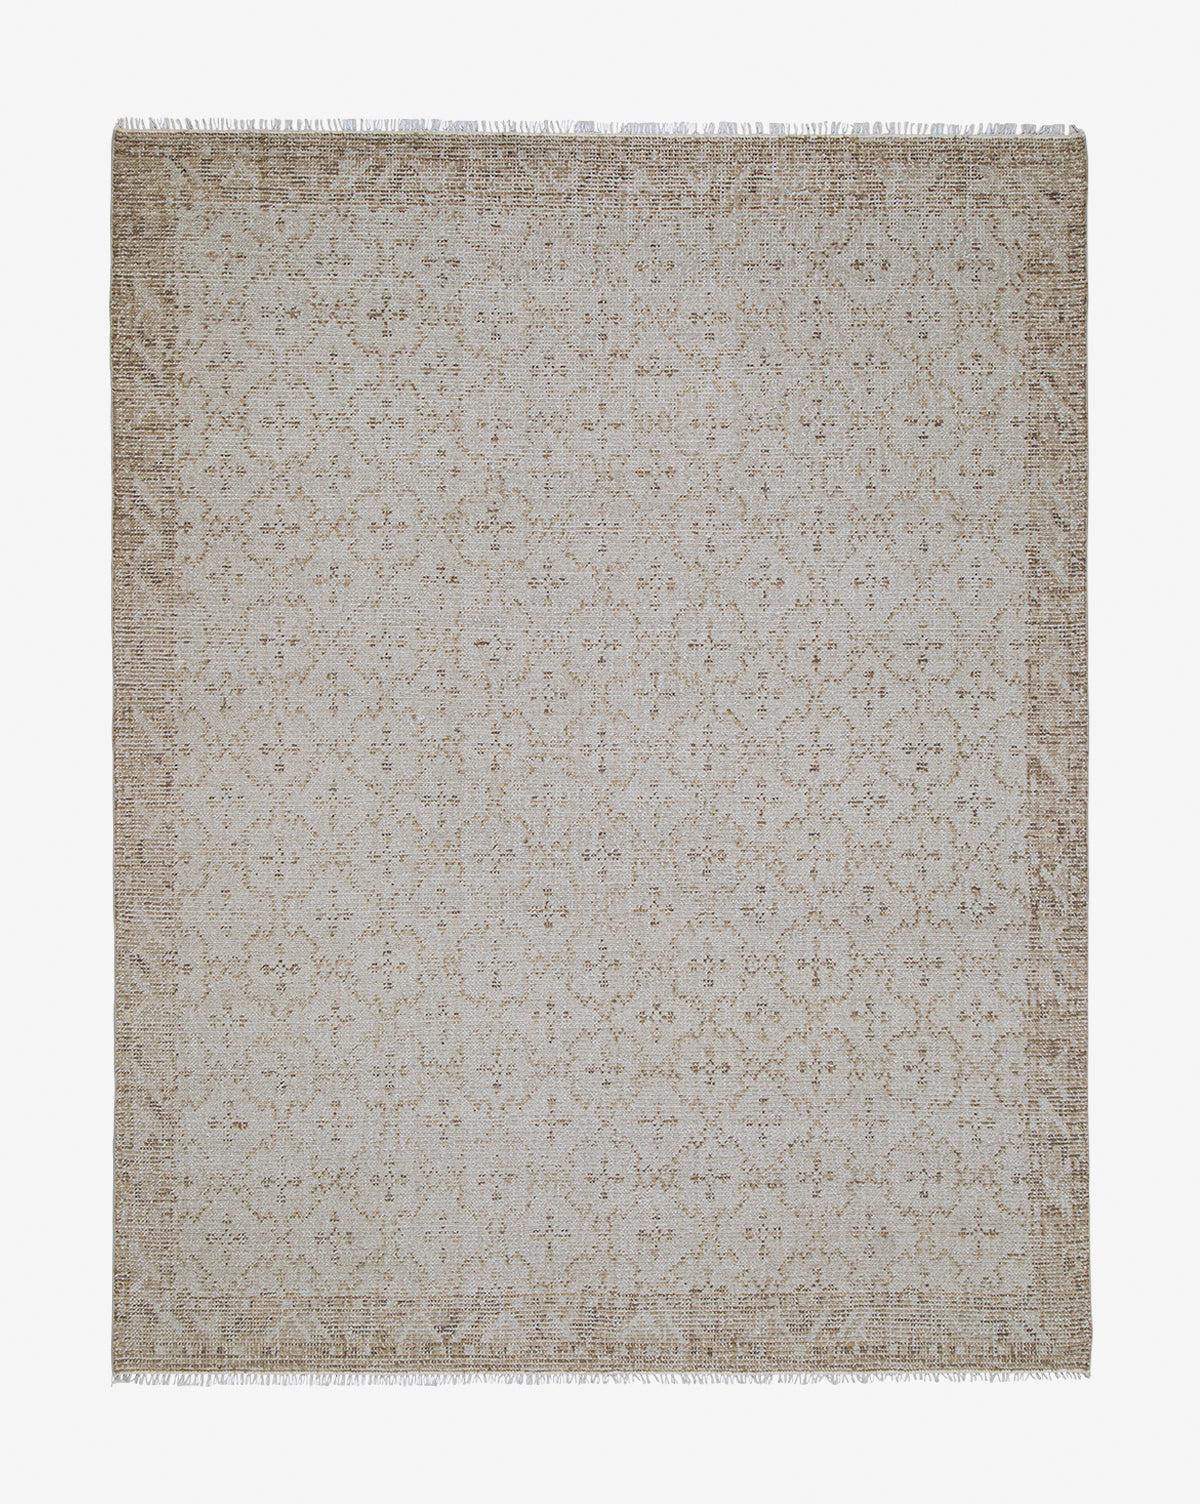 Obeetee, Mali Hand-Knotted Rug